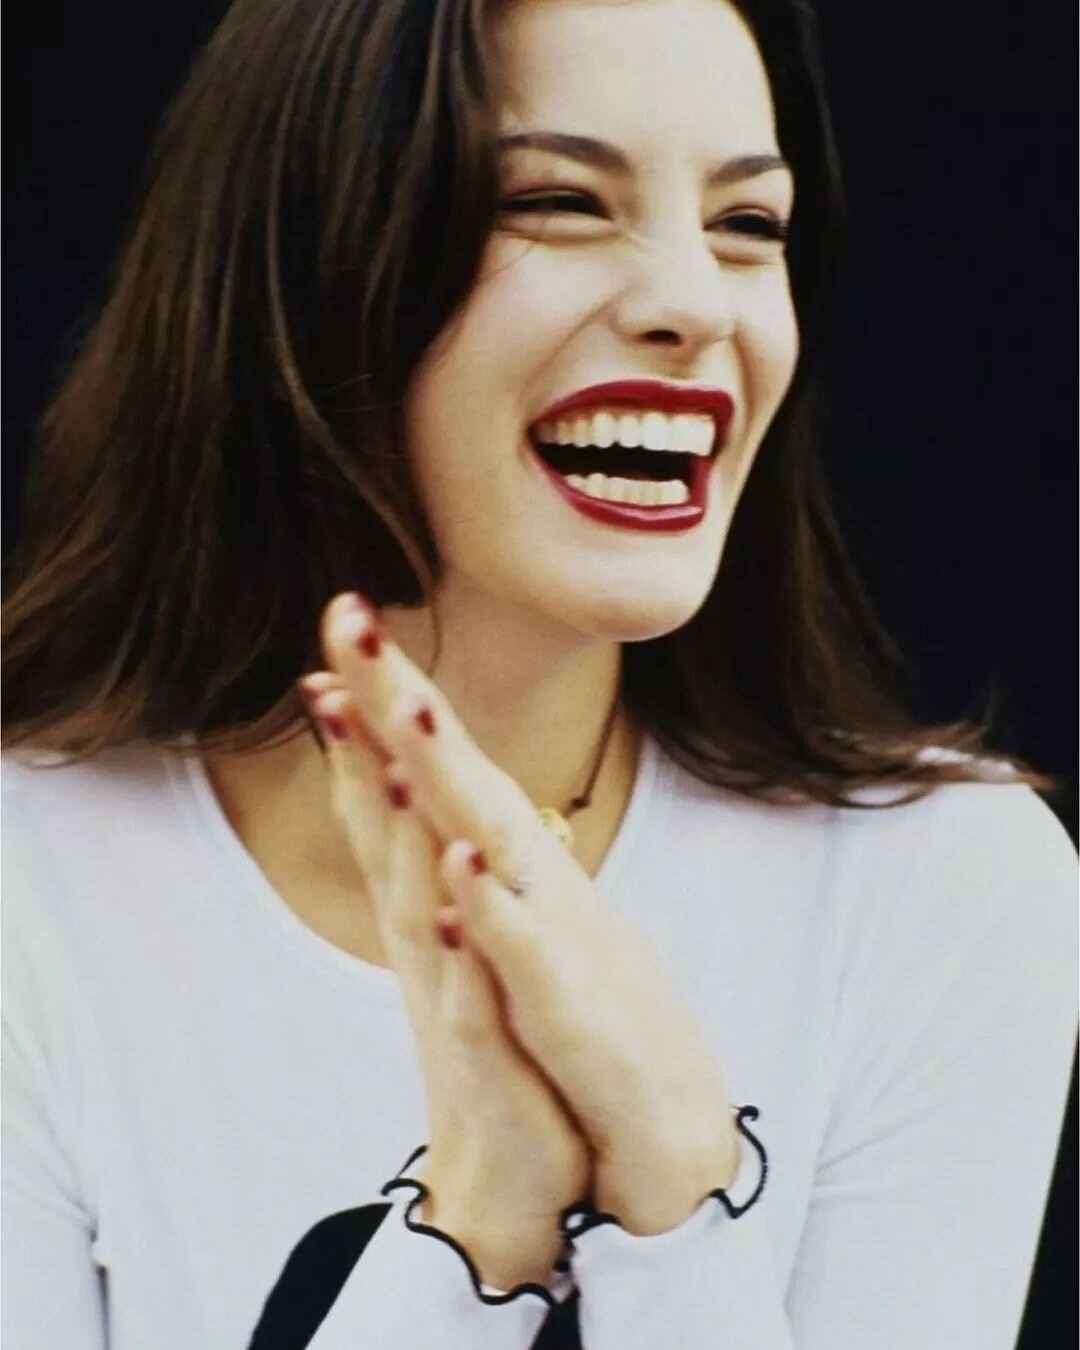 The weekend is finally here and I just love that for us 🍒 ⁠
⁠
Liv Tyler photography by Lara Rossignol, 1995 via @viintageheart⁠
⁠
SHOPLAUNCHPARTY.COM